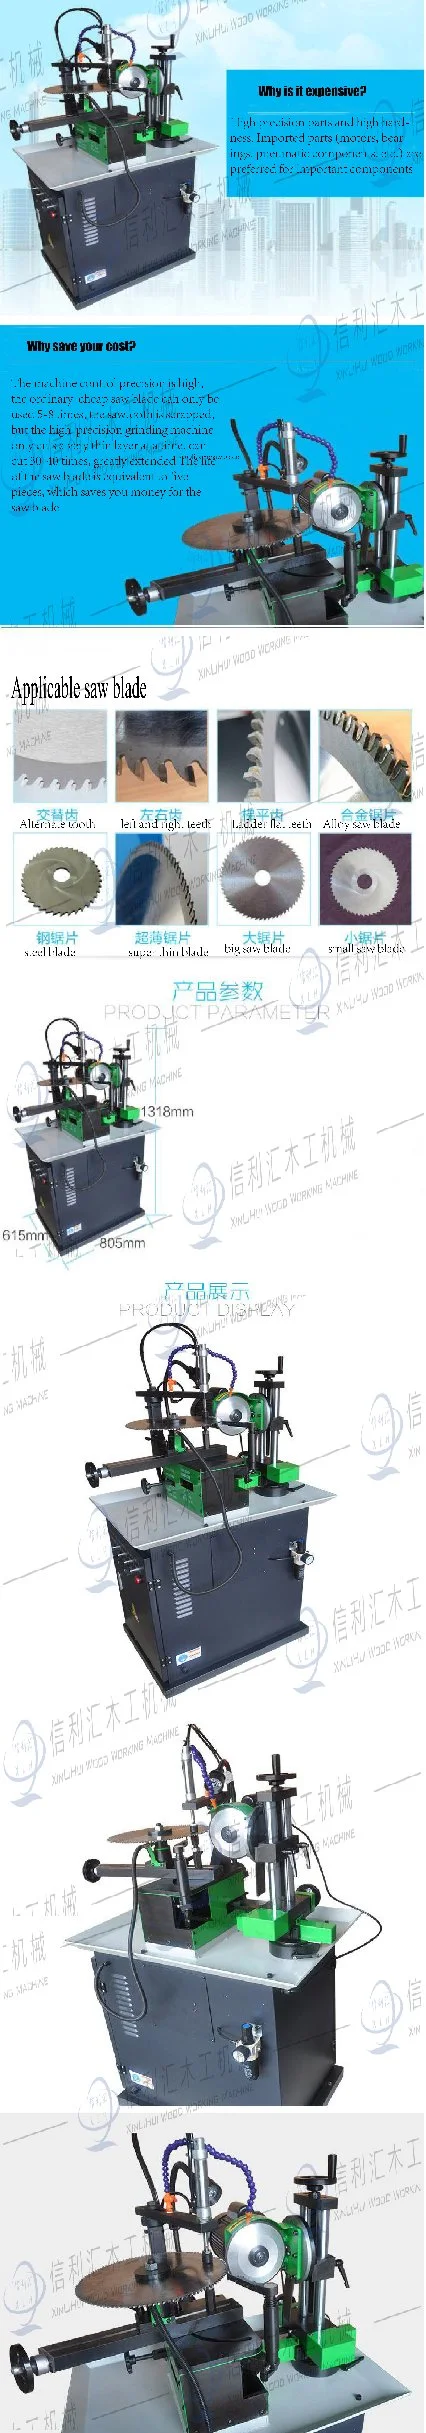 Automatic Grinding for Planer Knives / Cutter Grinding Polishing Machine Sawblade Grinder Machine Sawblade Gear Grinding Machines